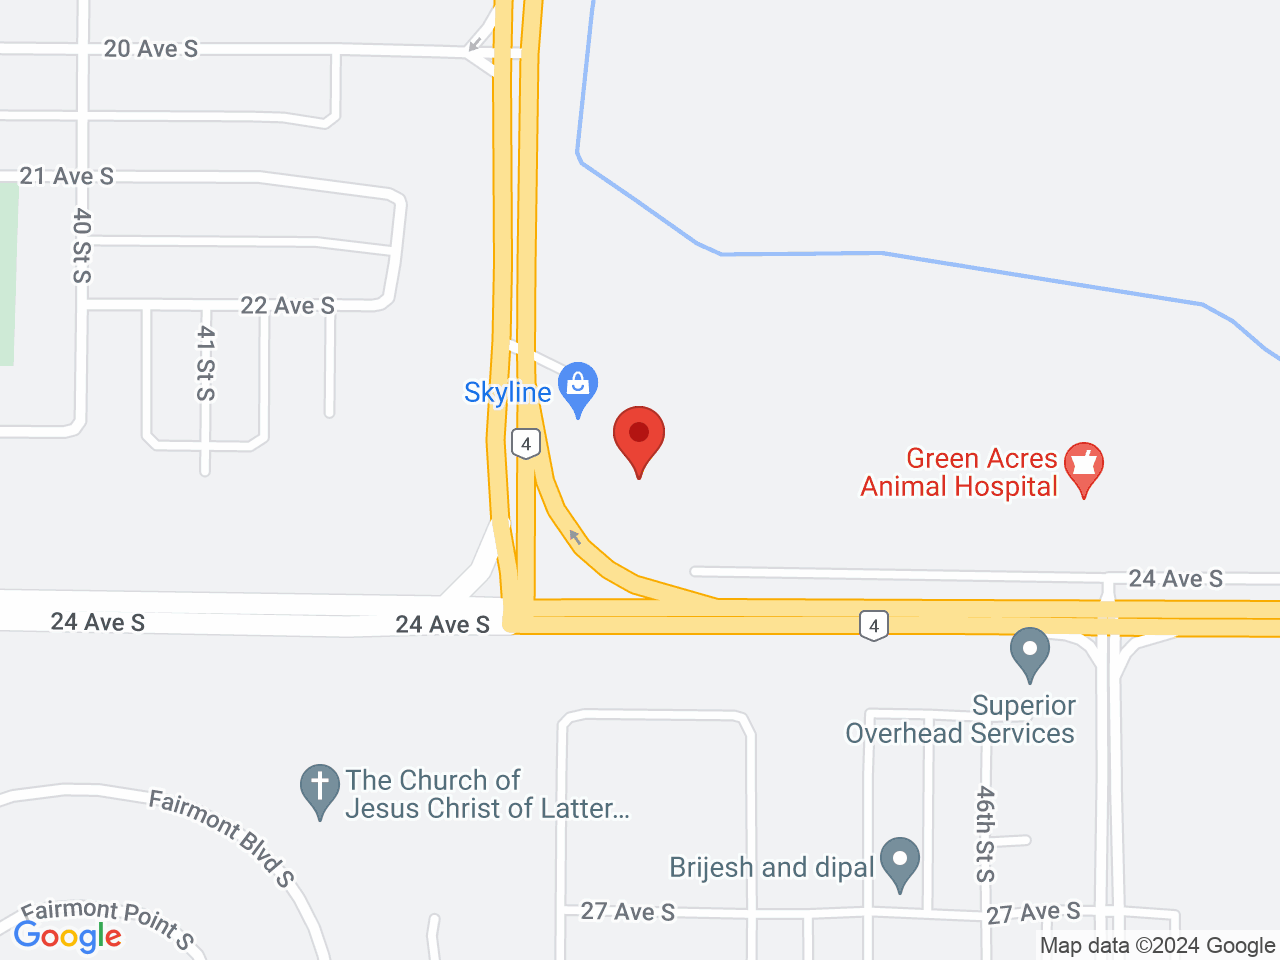 Street map for Retail Cannabis Store Ltd., 4305 24 Ave. South, Lethbridge AB